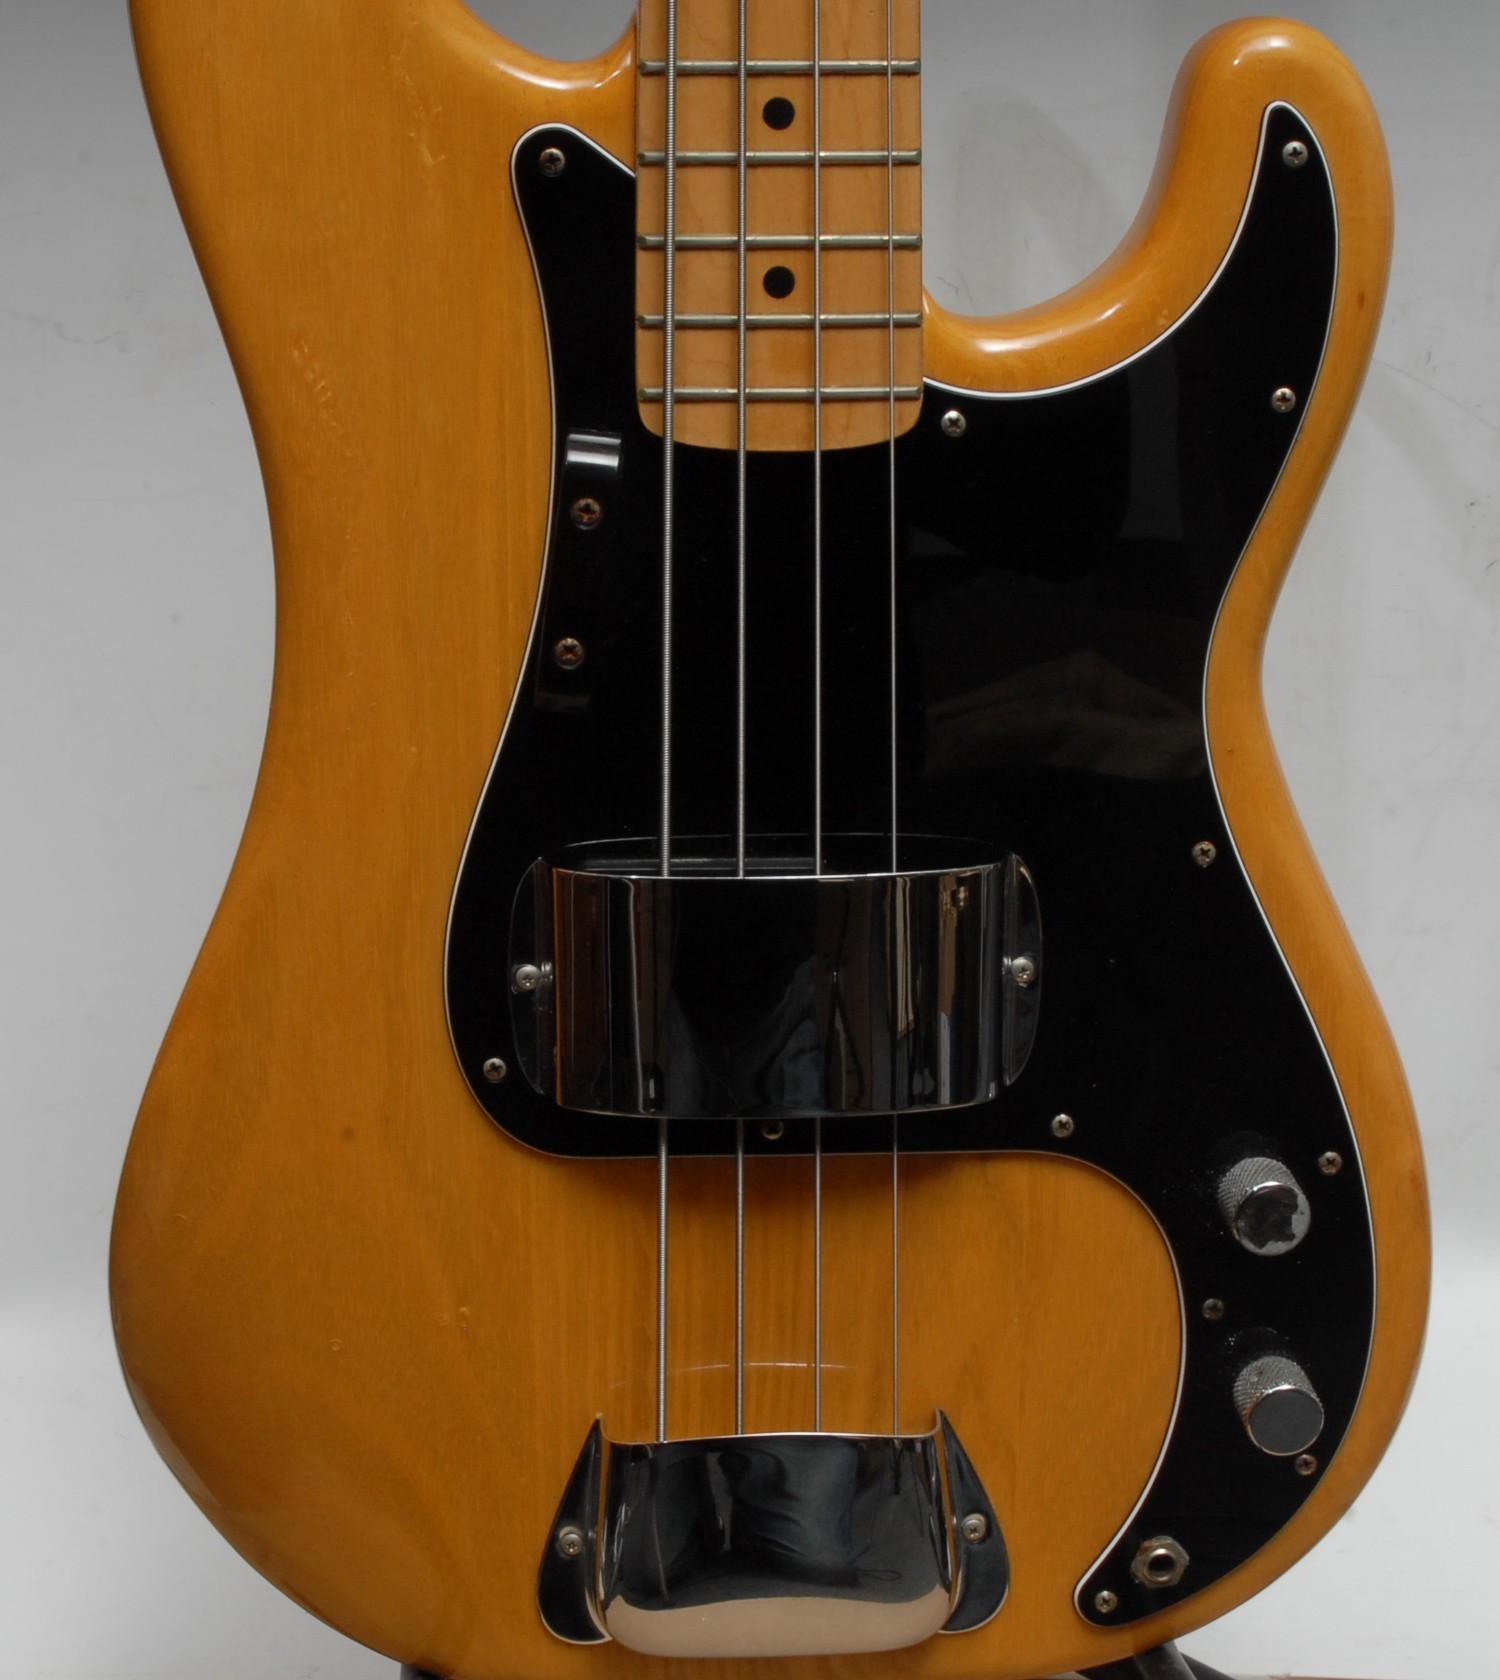 A Fender Precision electric bass guitar USA, natural wood body, maple neck, black pickguard. - Image 6 of 16